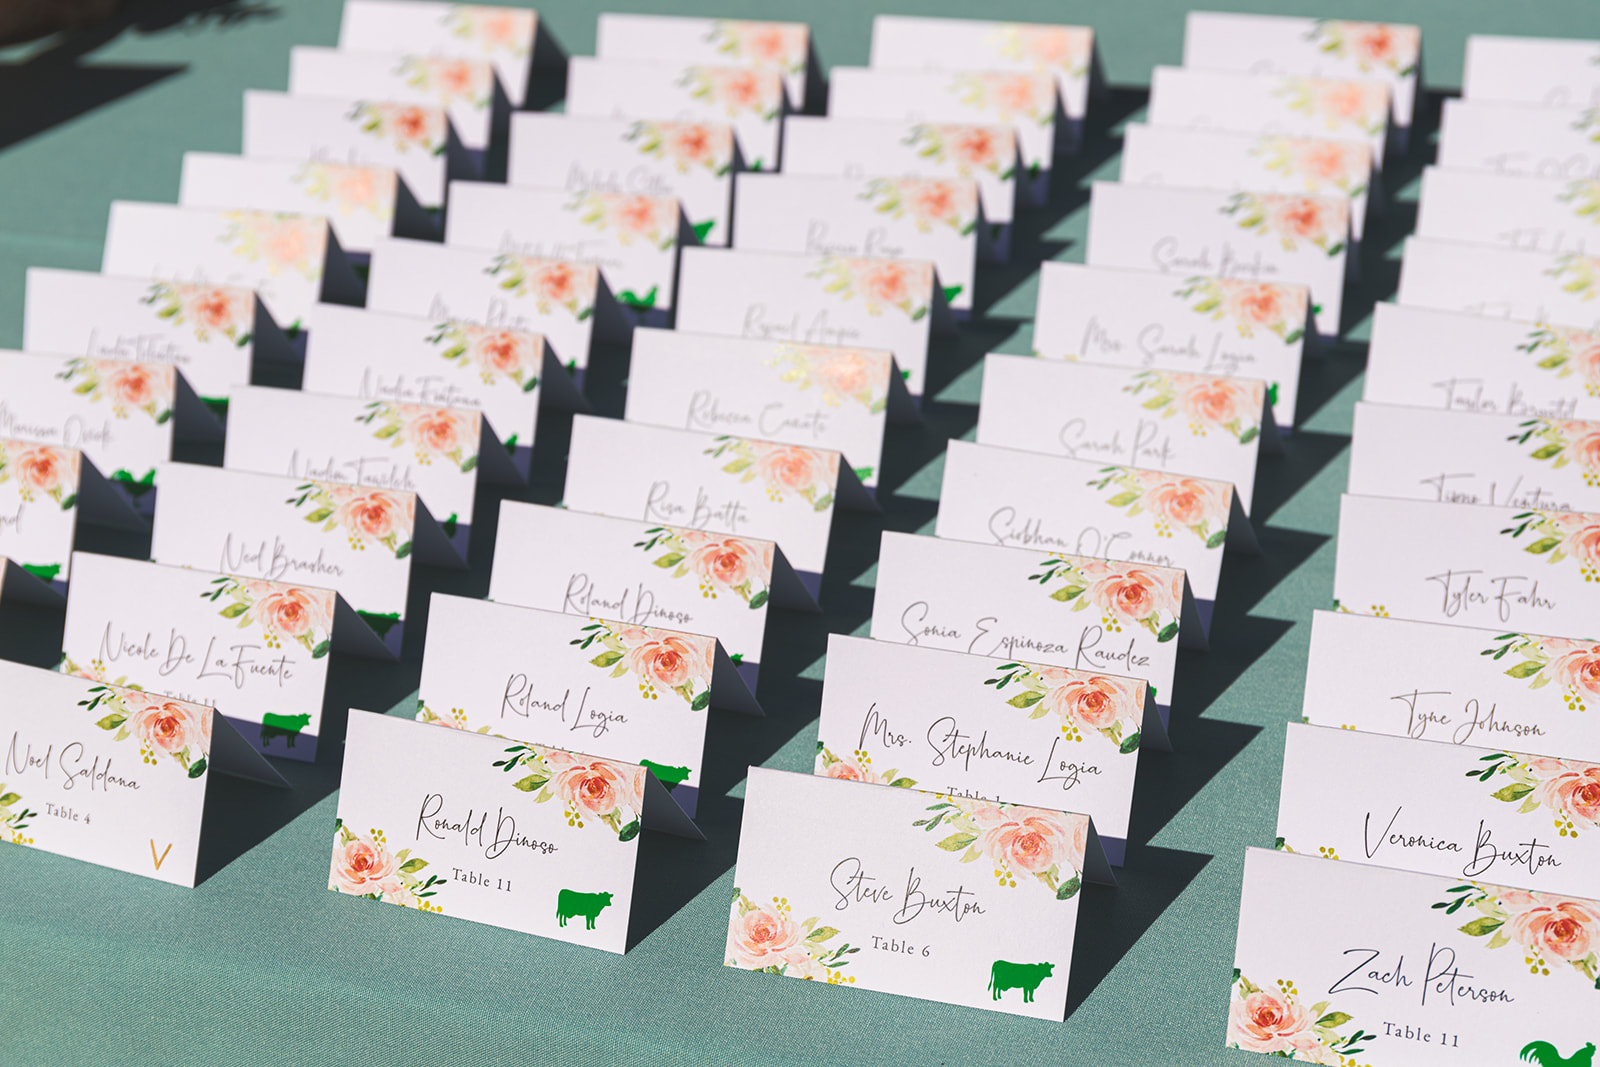 Name cards with pink florals for a wedding